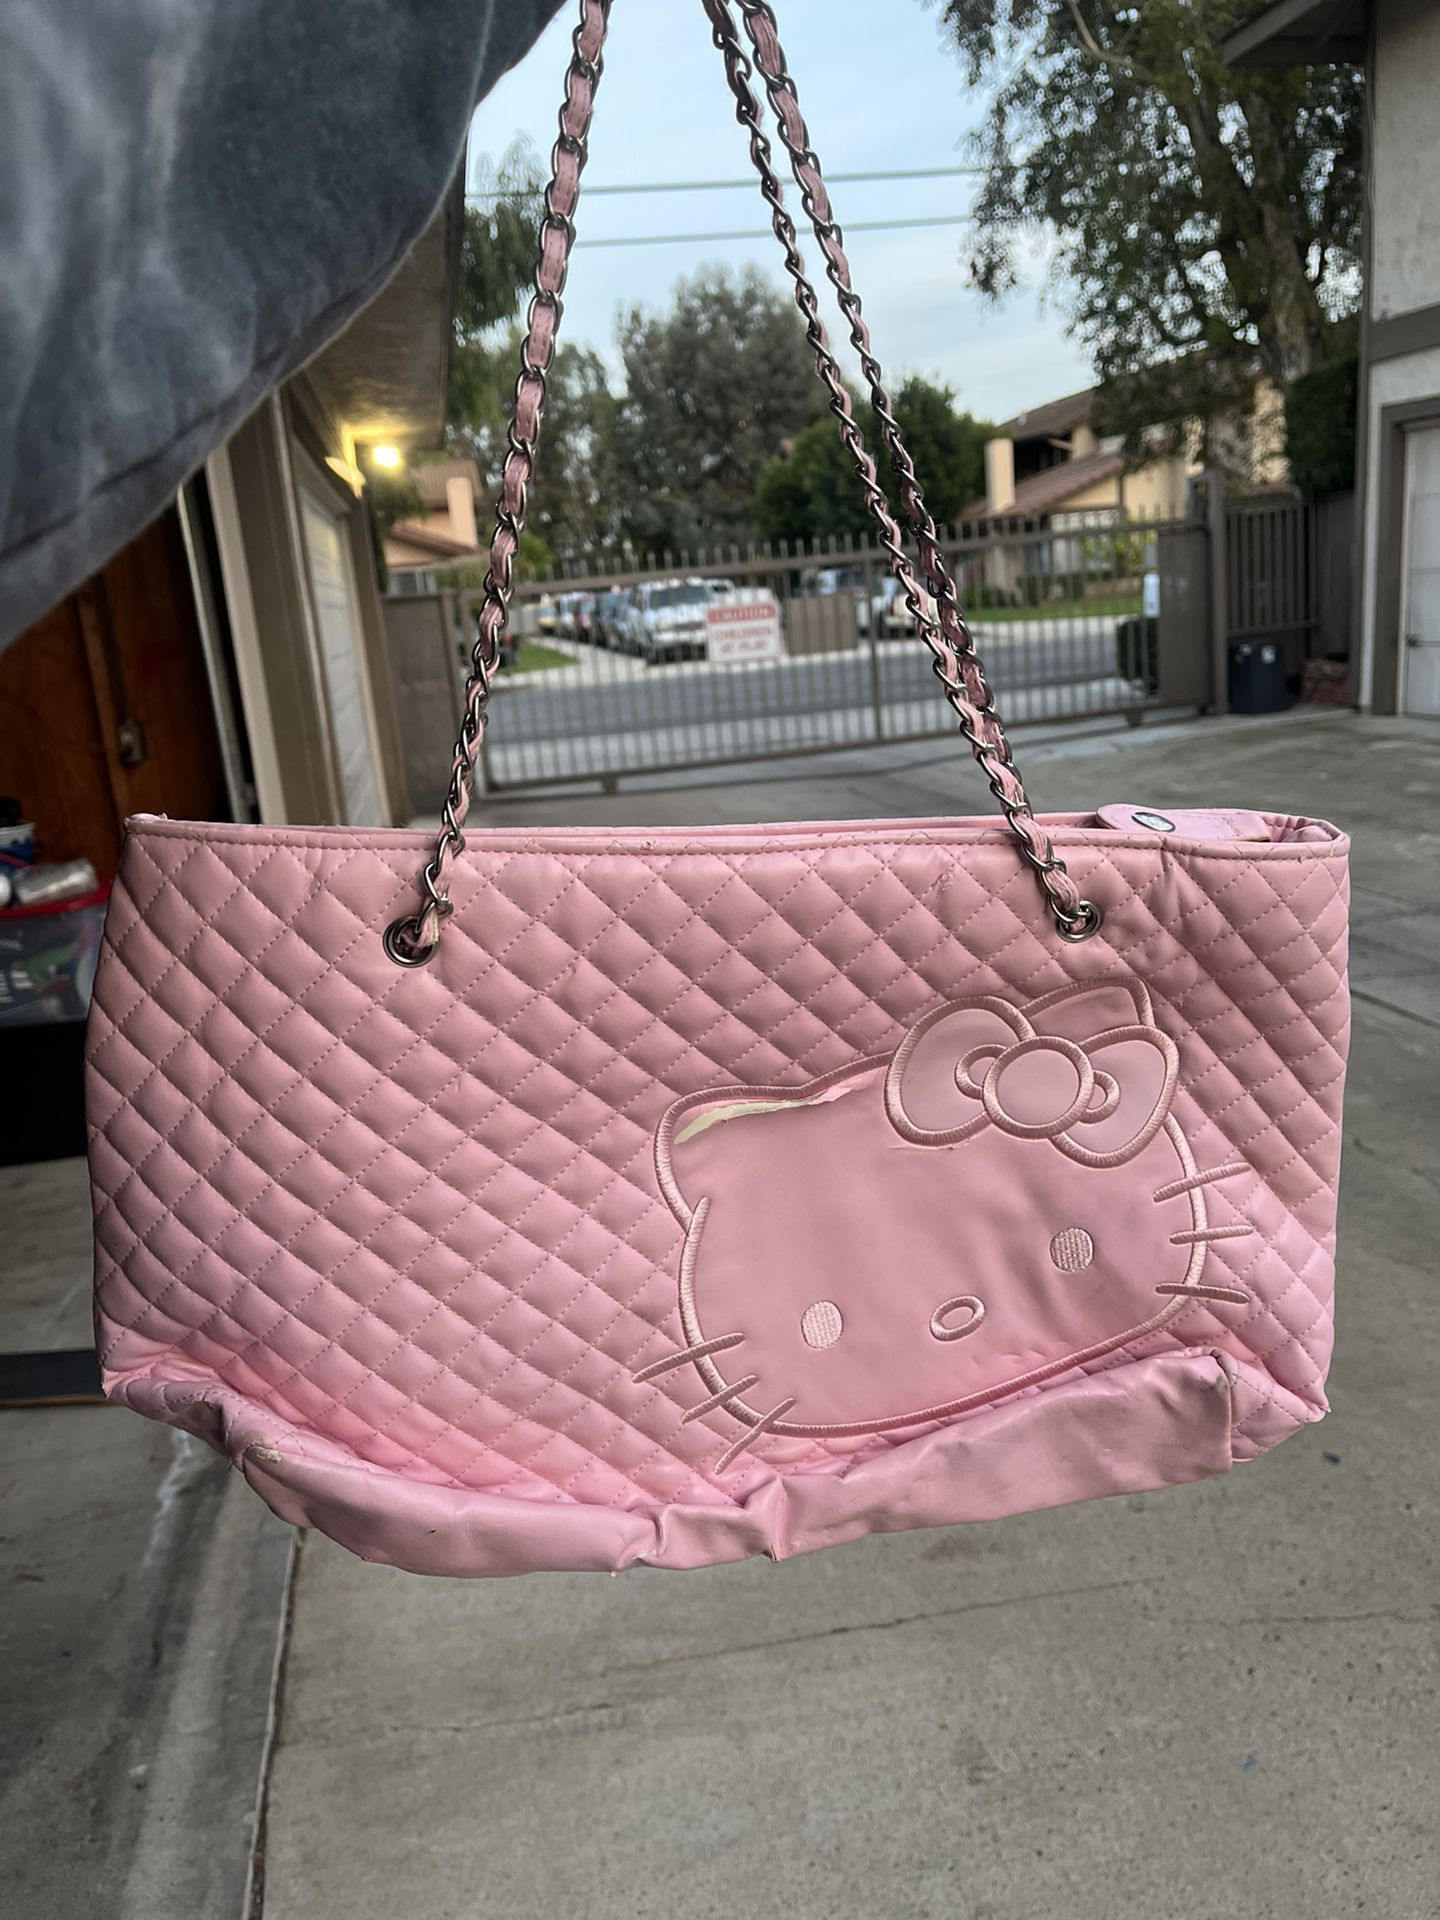 vintage hello kitty bag for Sale in Buena Park, CA - OfferUp